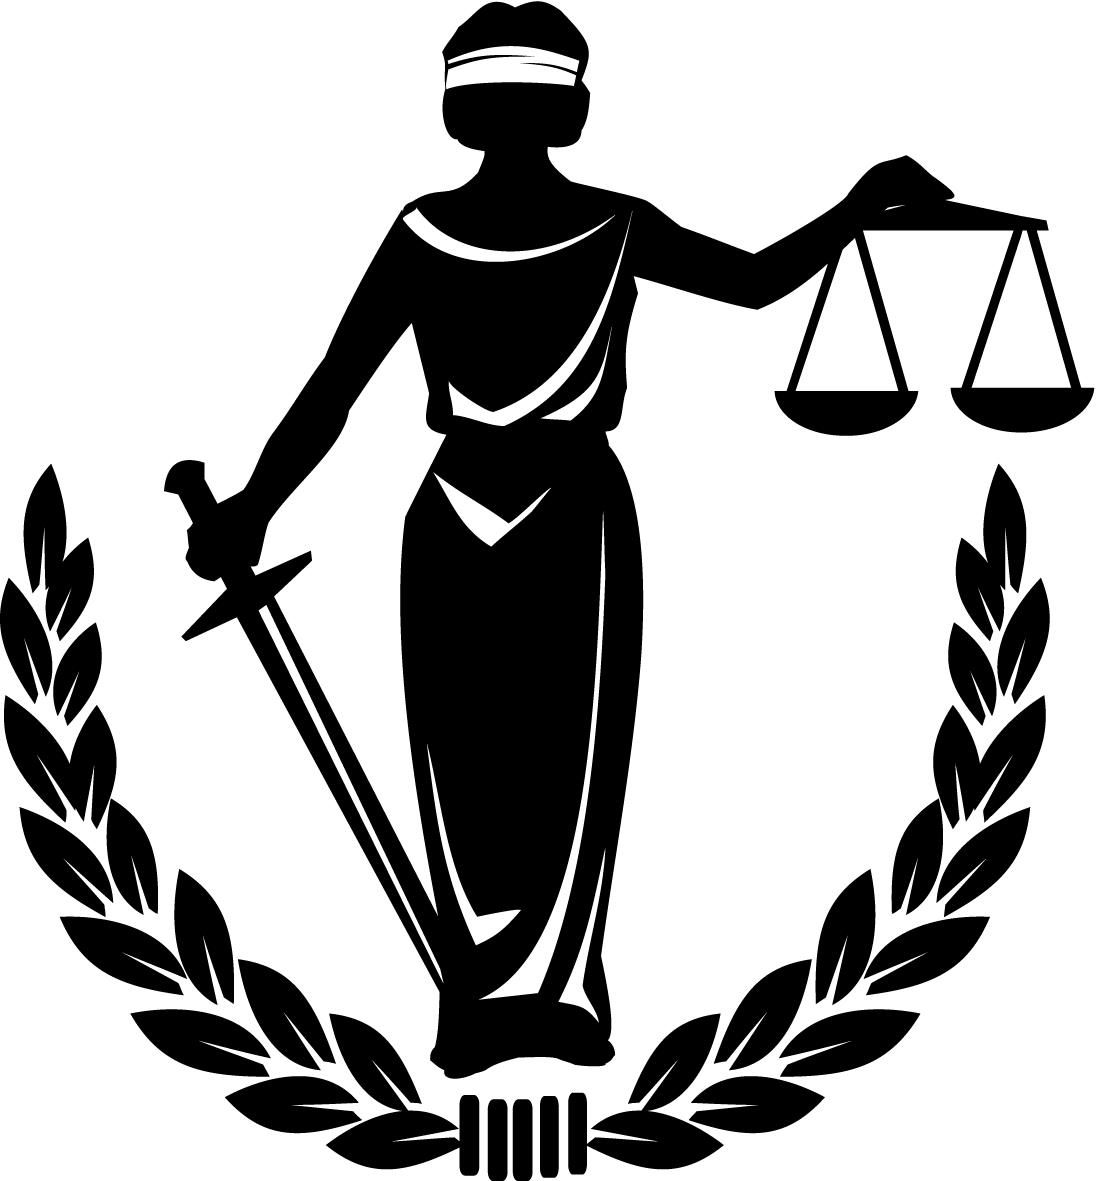 scales of justice clip art free download - photo #24